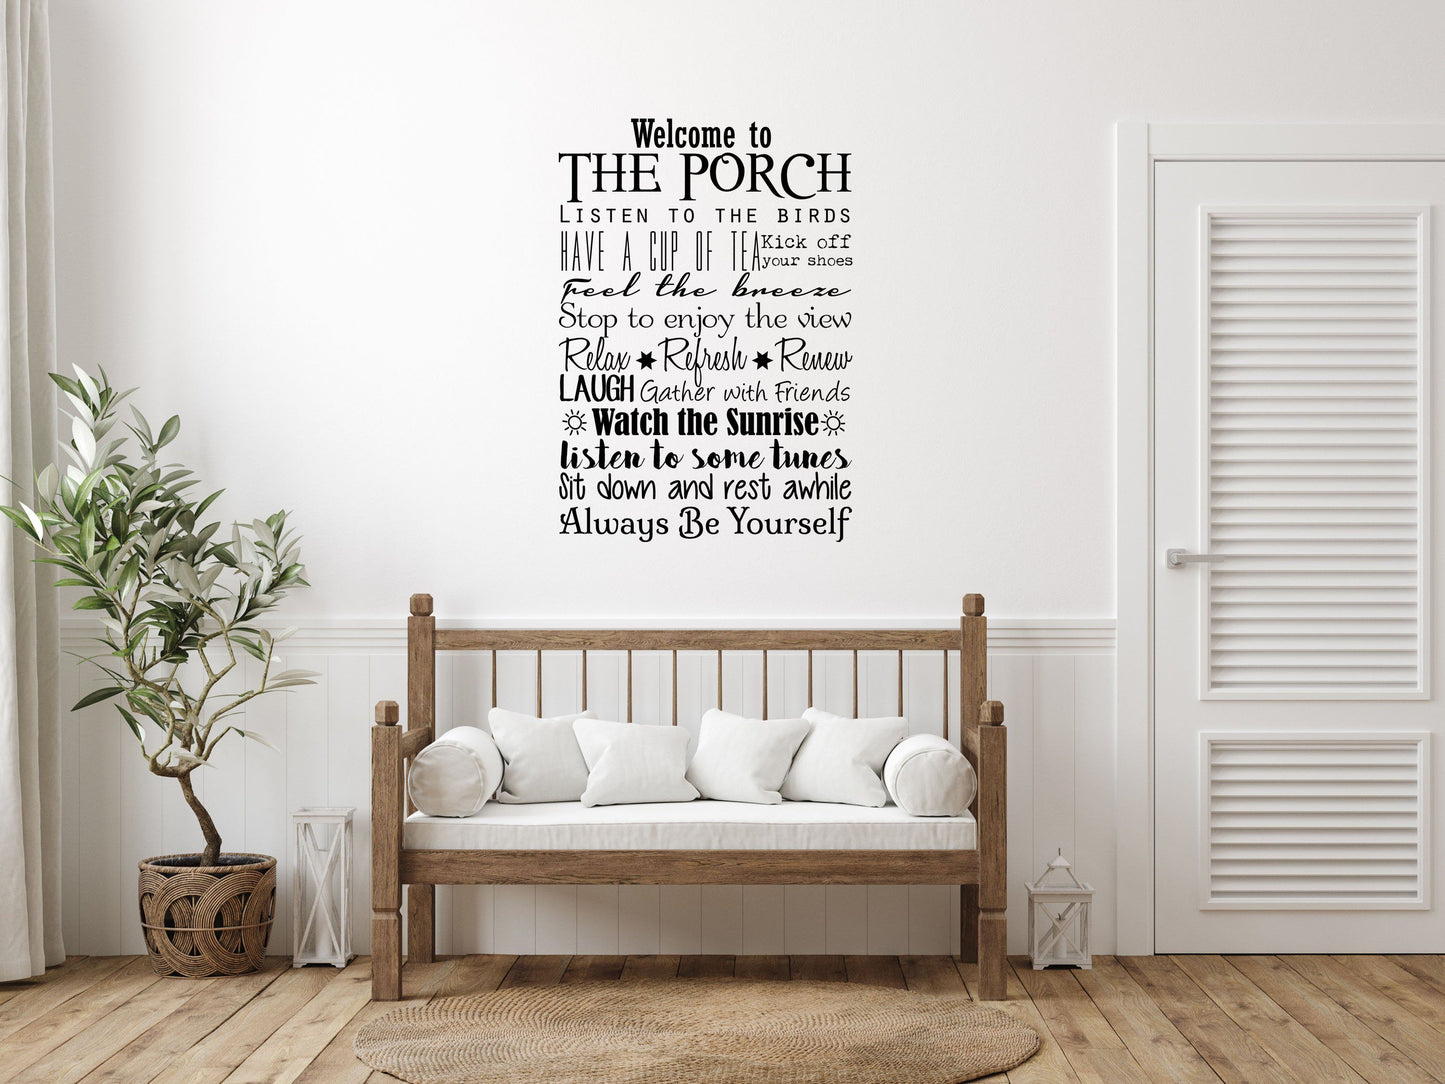 Welcome To The Porch - Inspirational Wall Decals Vinyl Wall Decal Inspirational Wall Signs 